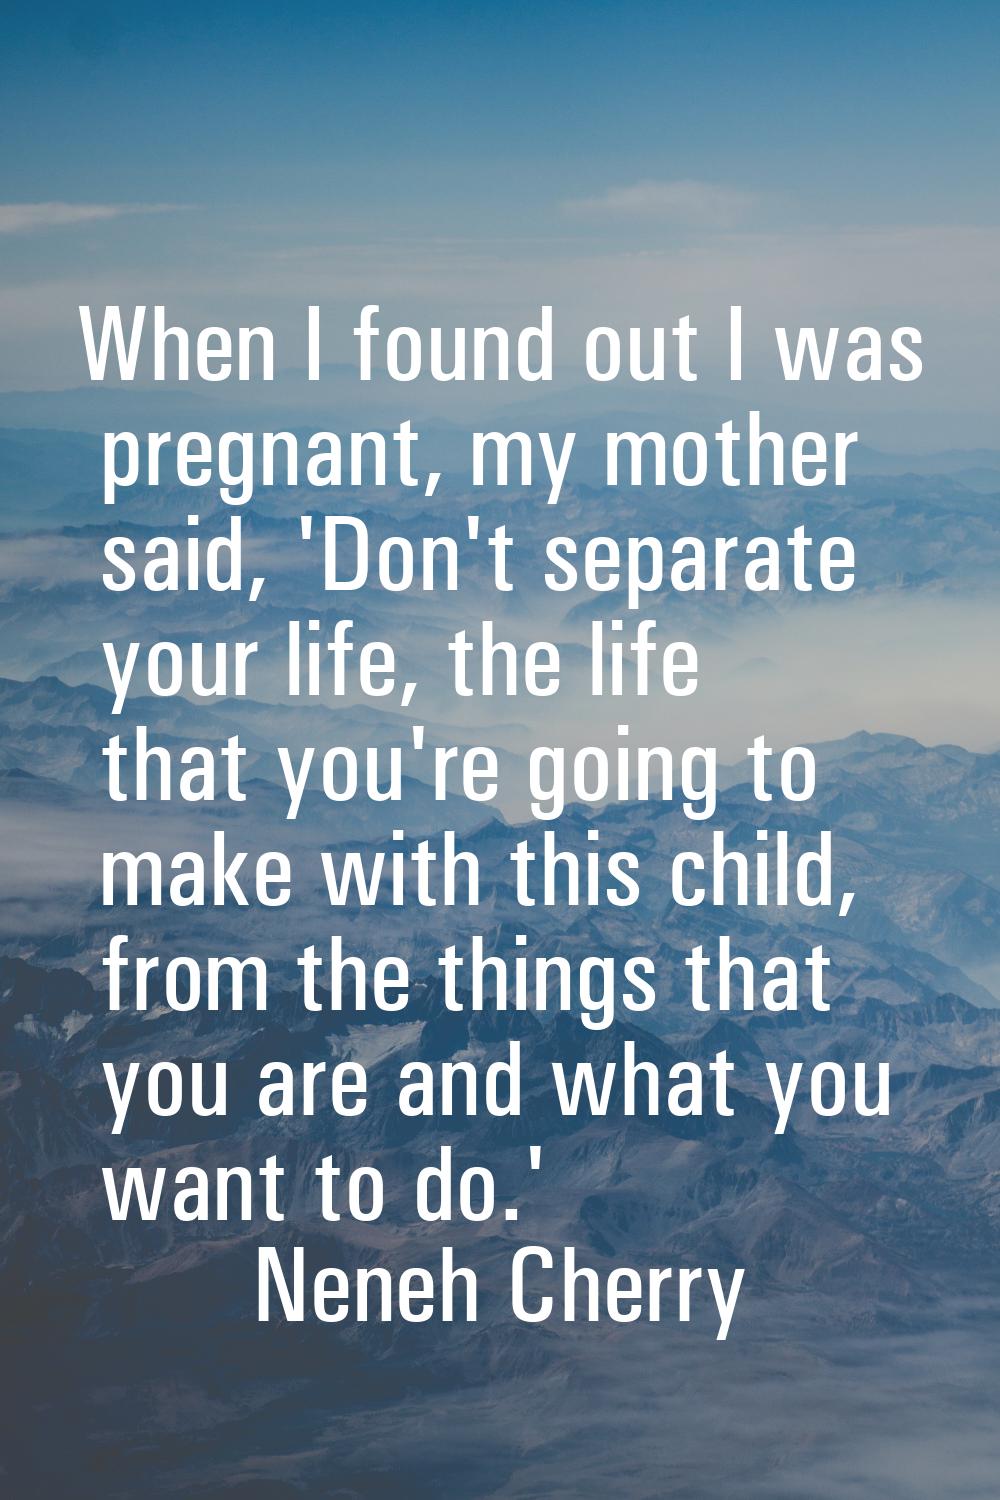 When I found out I was pregnant, my mother said, 'Don't separate your life, the life that you're go